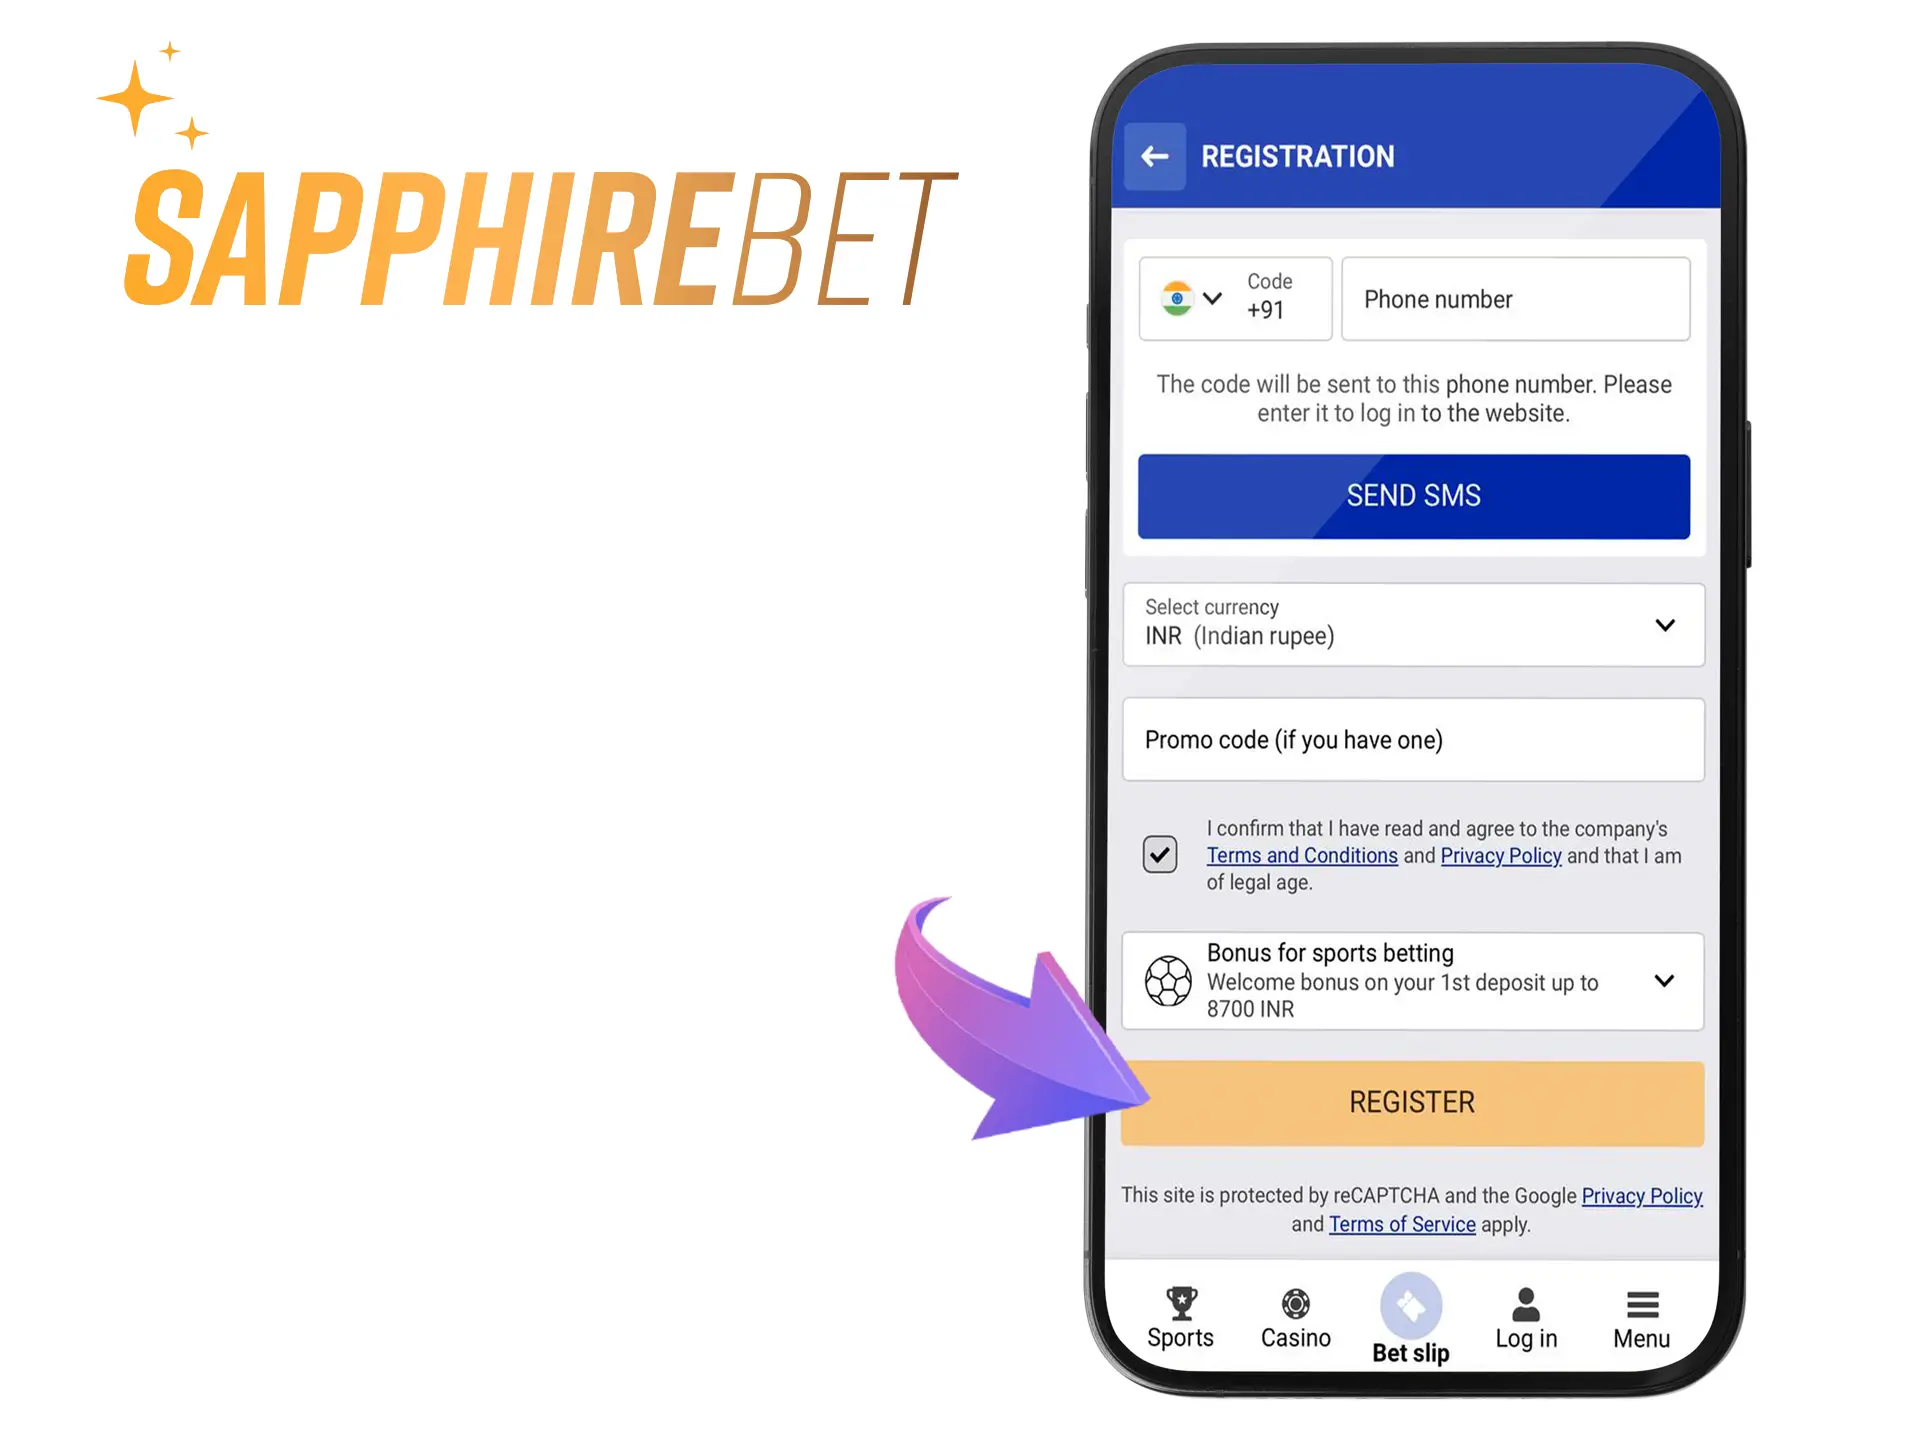 Complete your registration with Sapphirebet and start betting and gaming.